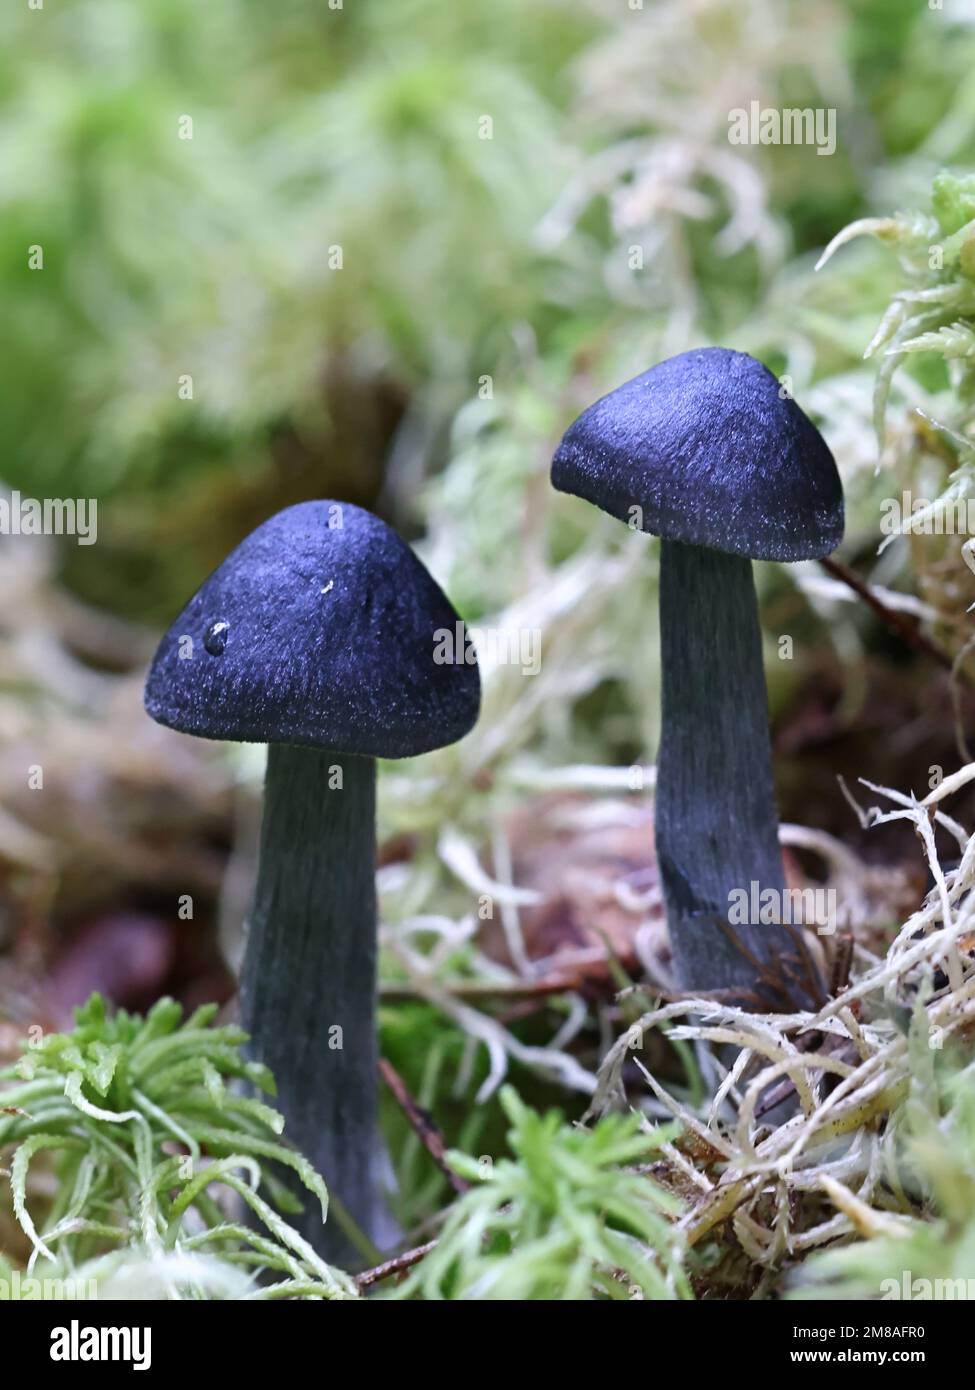 Entoloma nitidum, commonly known as pine pinkgill, wild mushroom from Finland Stock Photo